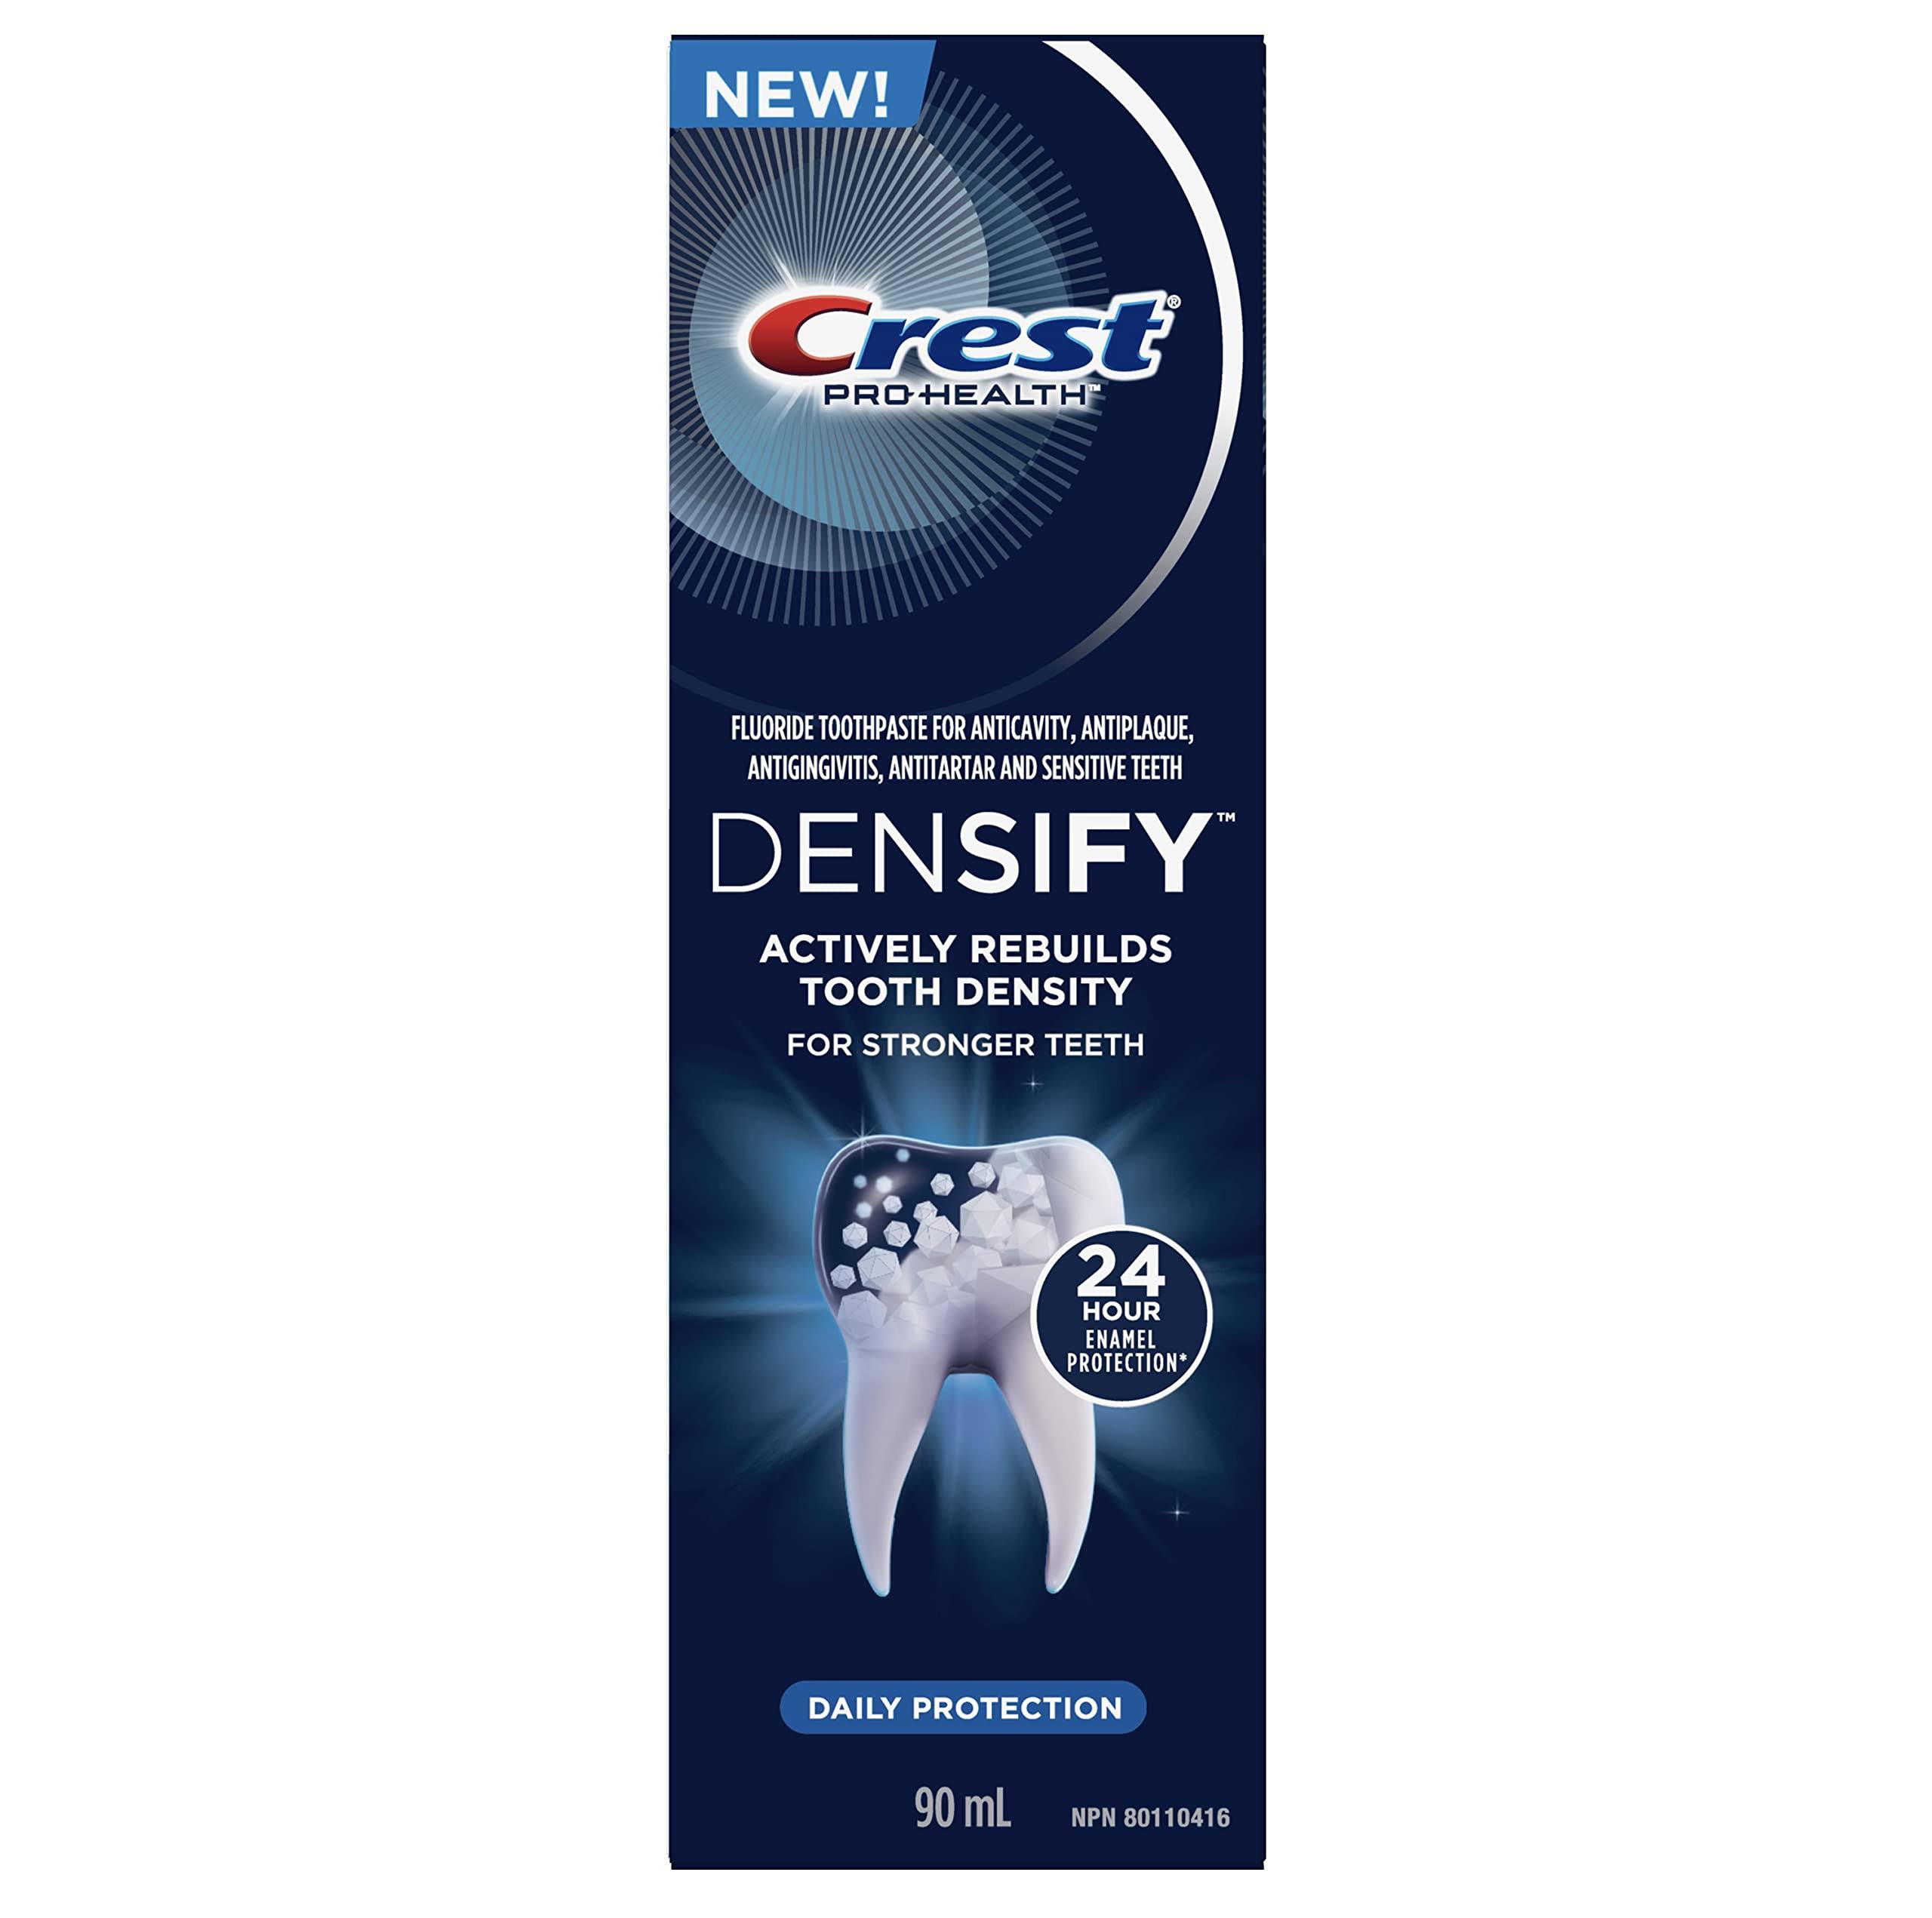 Crest Pro-Health Densify Daily Protection Toothpaste 90mL (6)